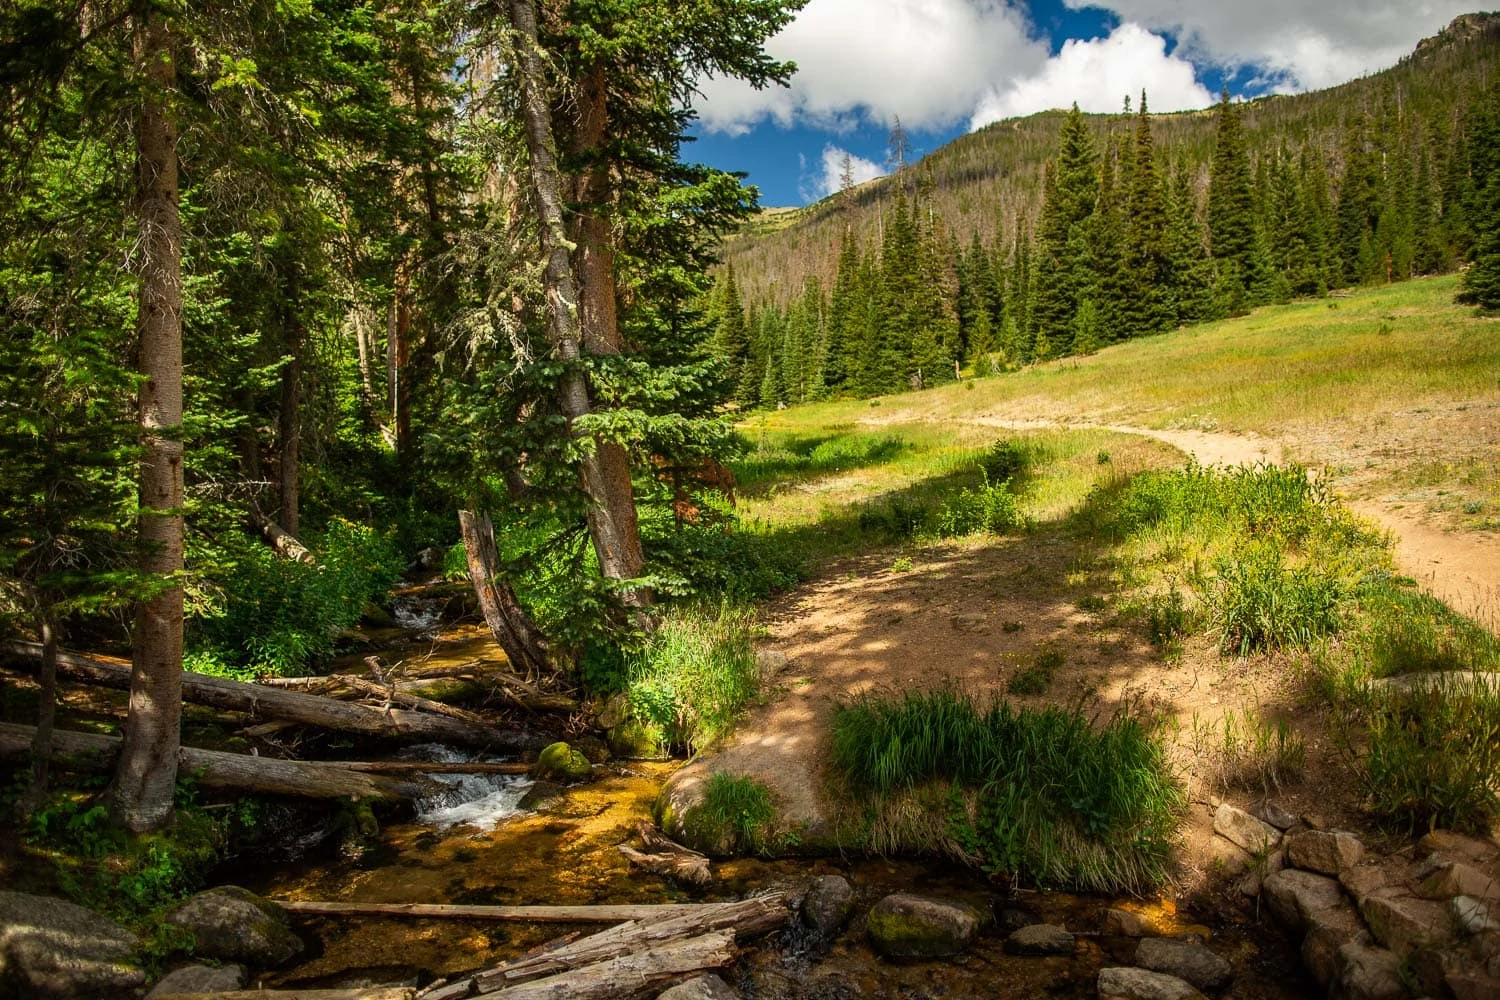 The Hidden Valley ceremony location in Rocky Mountain National Park has a hiking trail and small brook